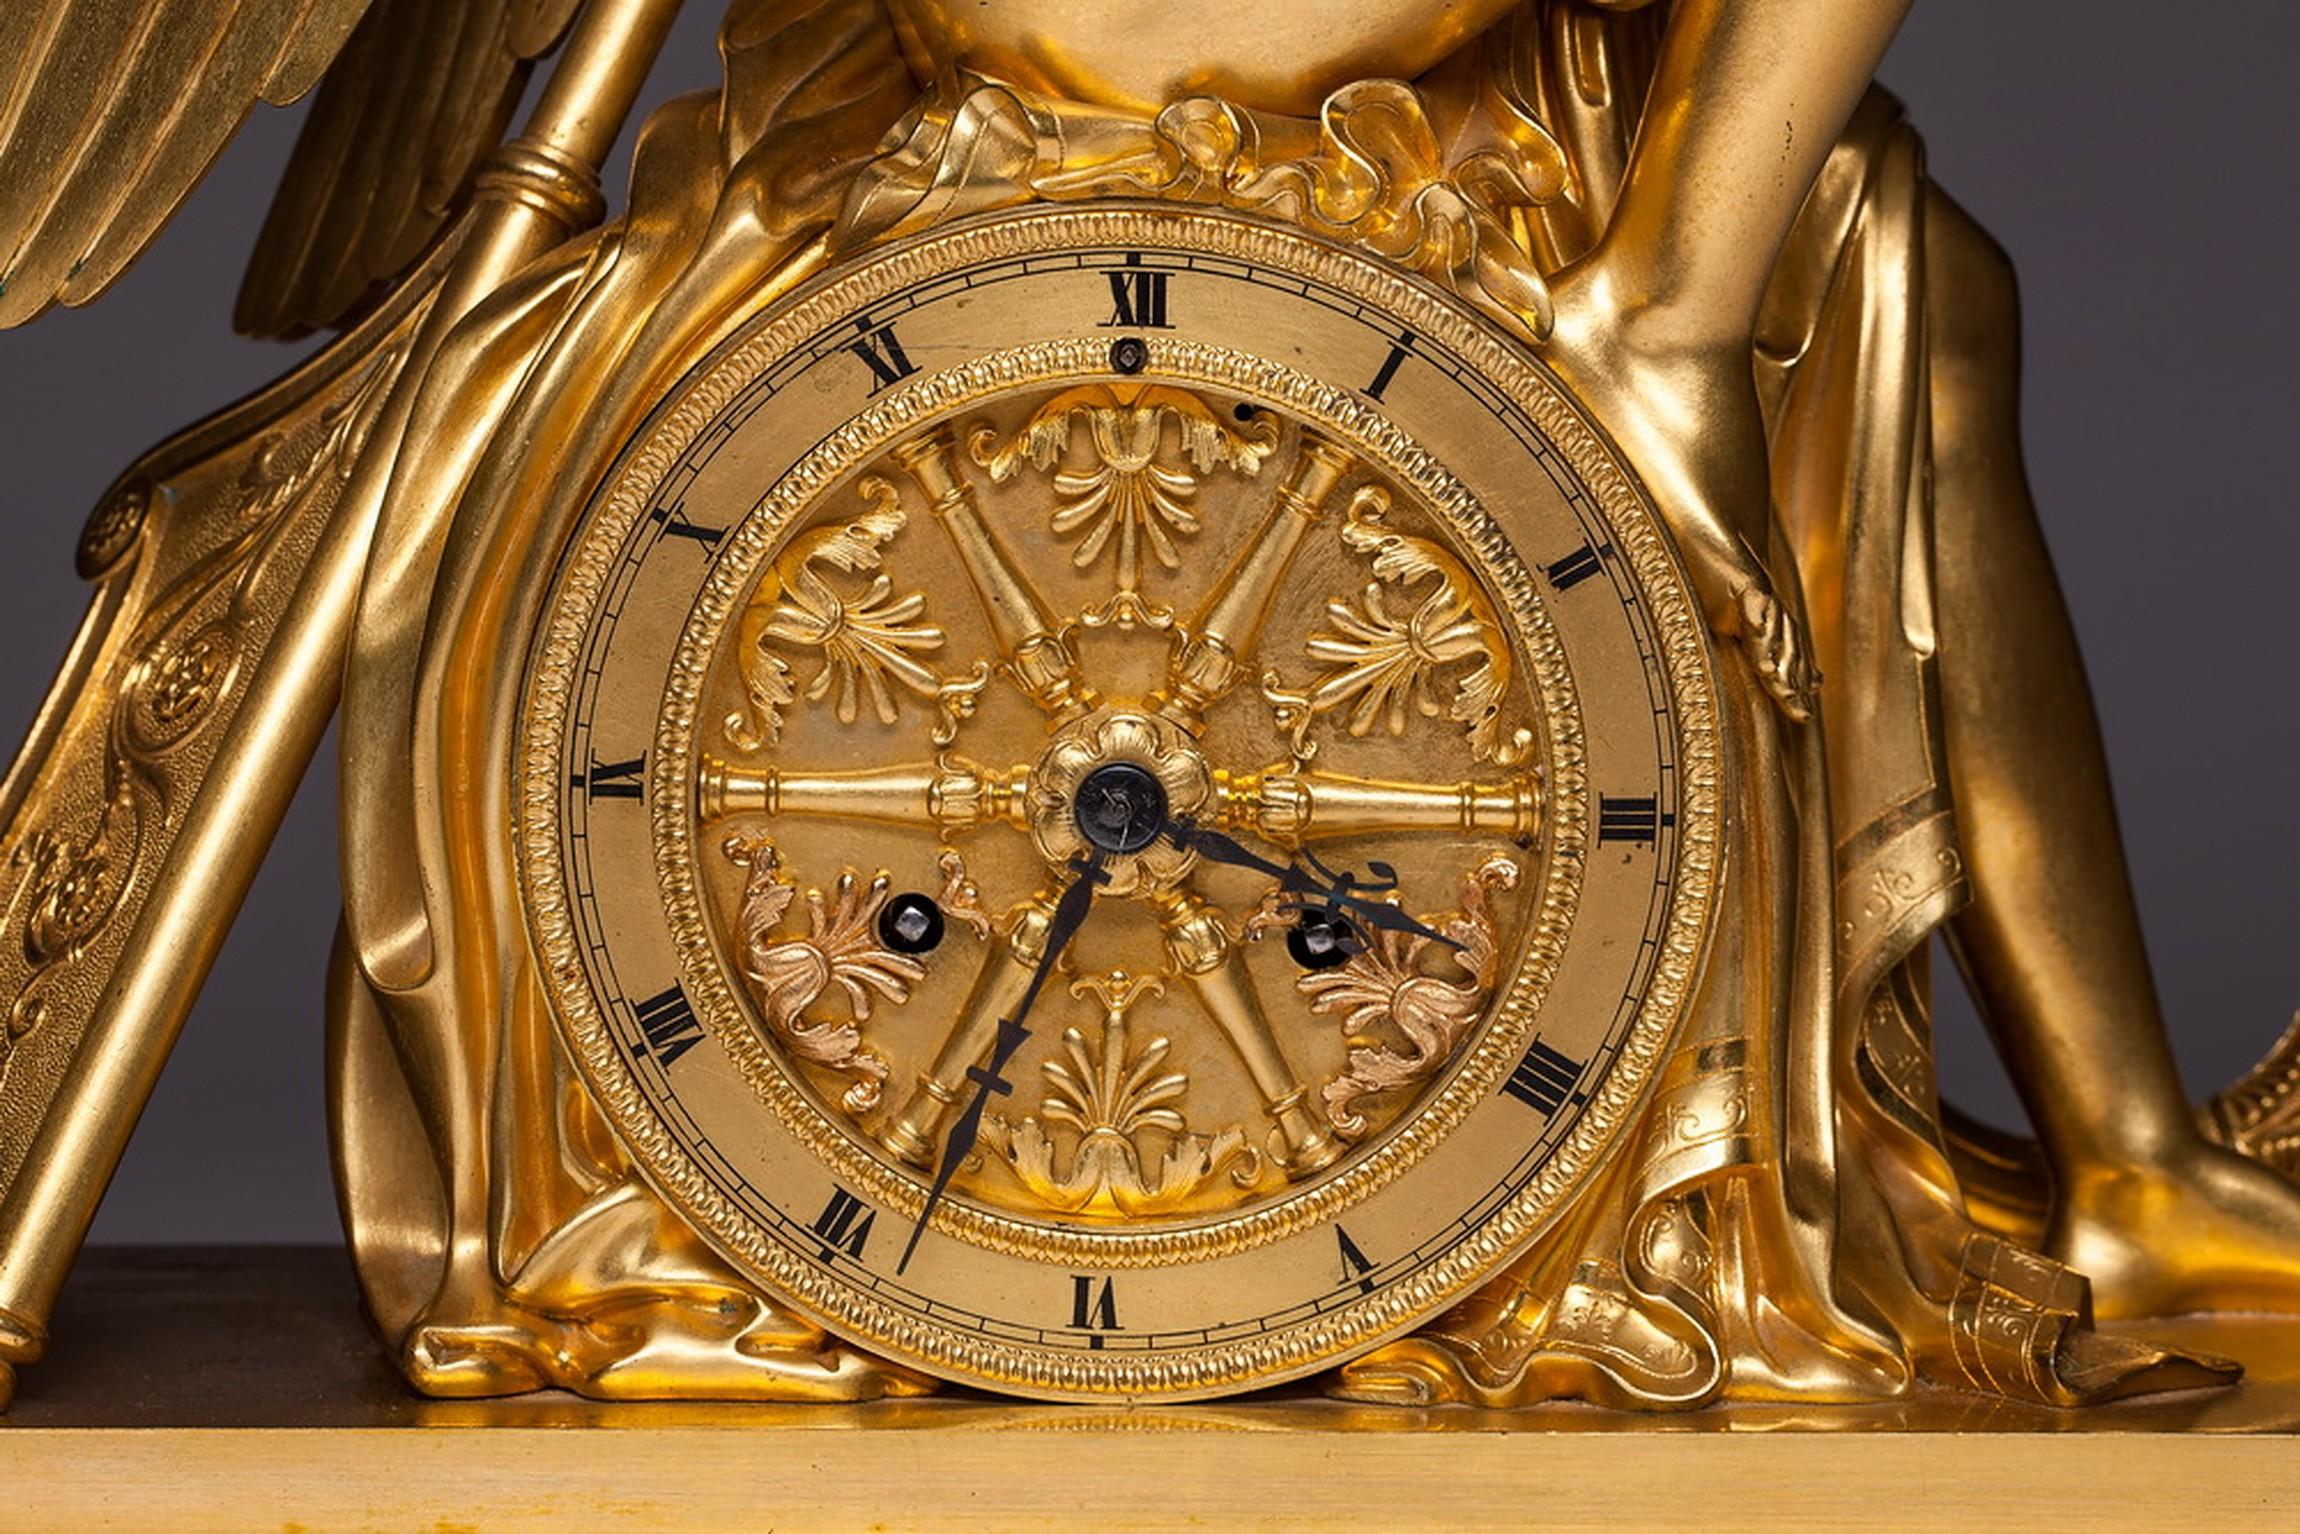 A rare and important Empire gilt bronze clock by the clockmaker Louis Moinet with also rare clock mechanism which is from bronze which imitates the rudder of the ship. The stamp is on the pther side of clockwork.

The clock movement was made by